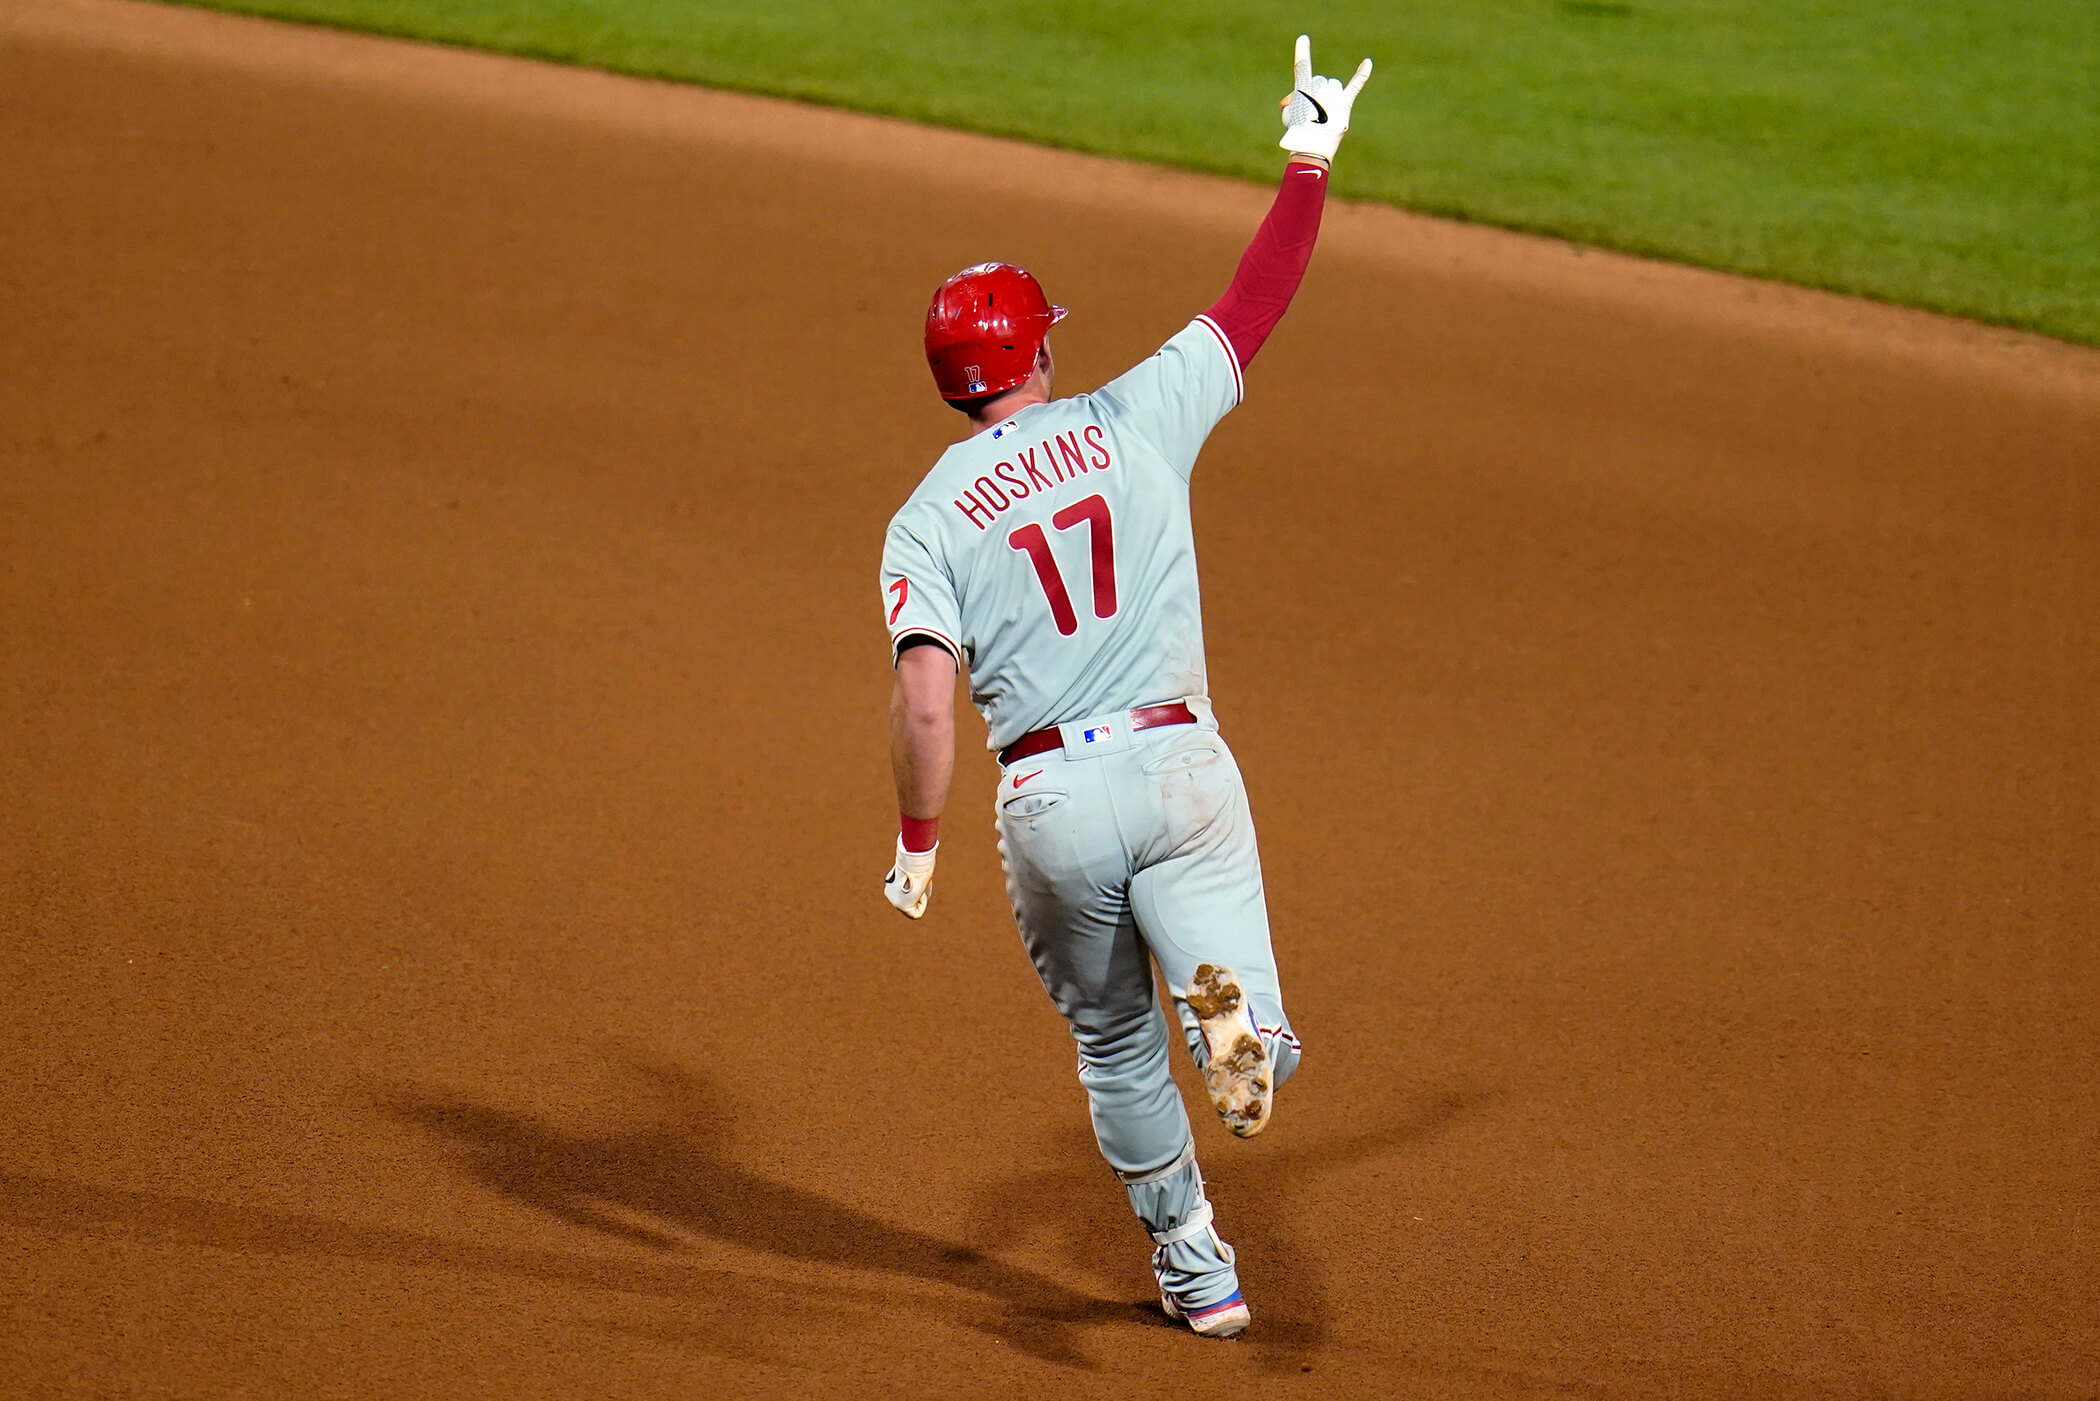 PHILLIES NOTES: Rhys Hoskins relieved after getting his first major league  hit